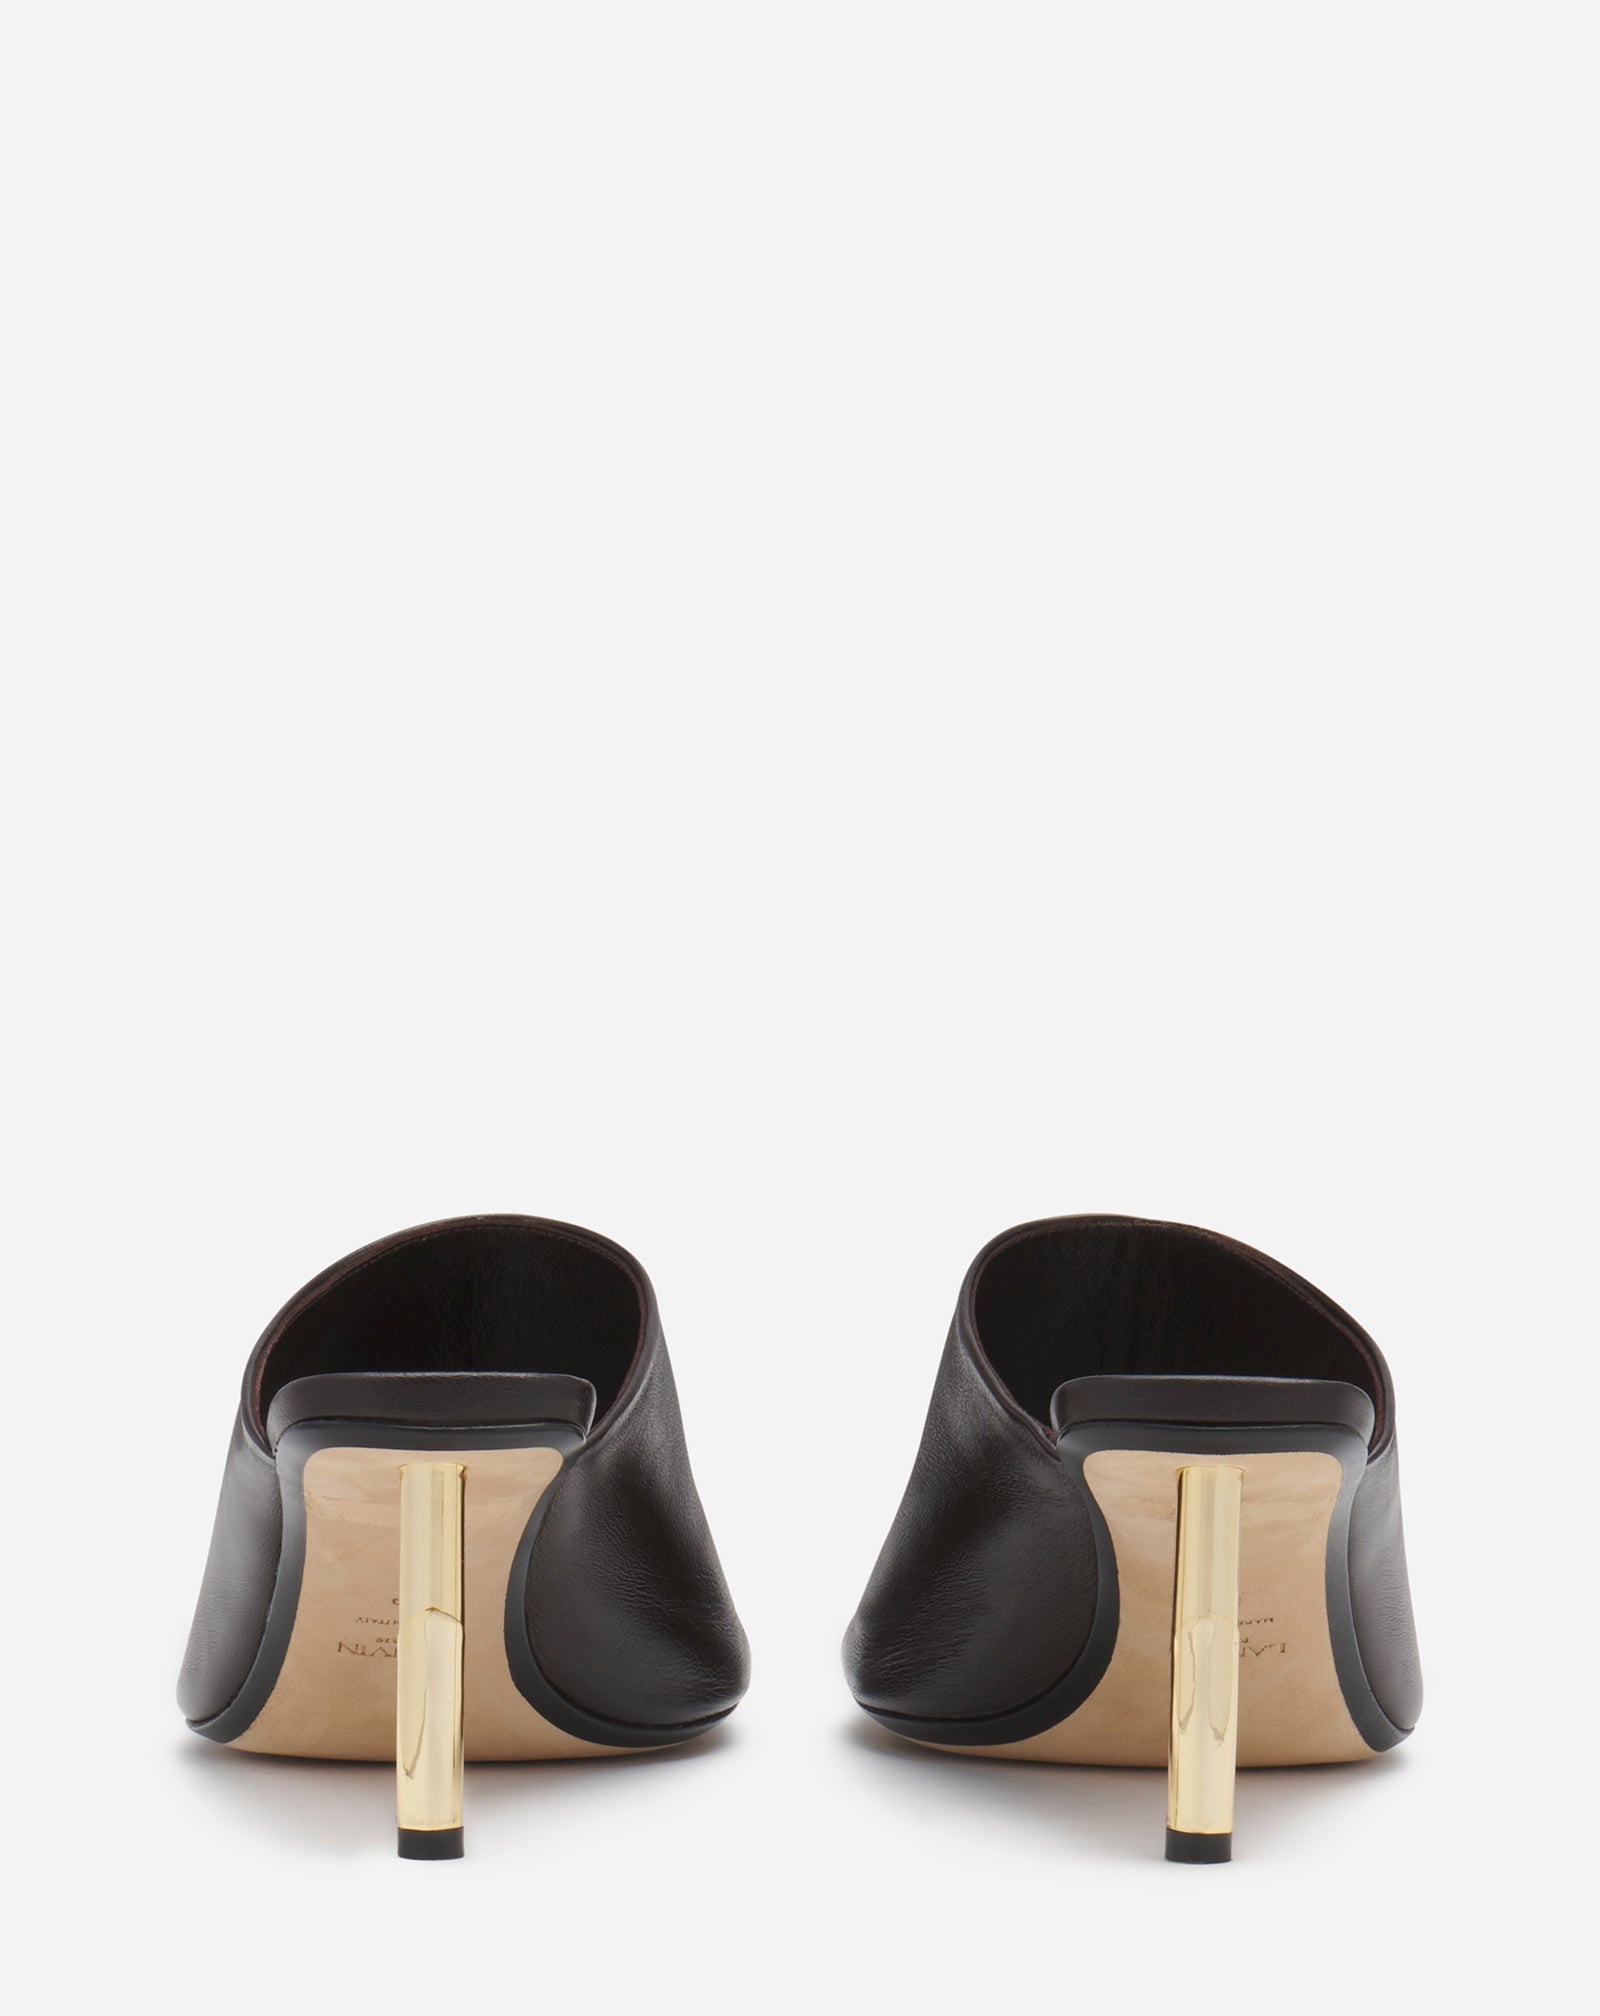 LEATHER SEQUENCE BY LANVIN MULES - 4